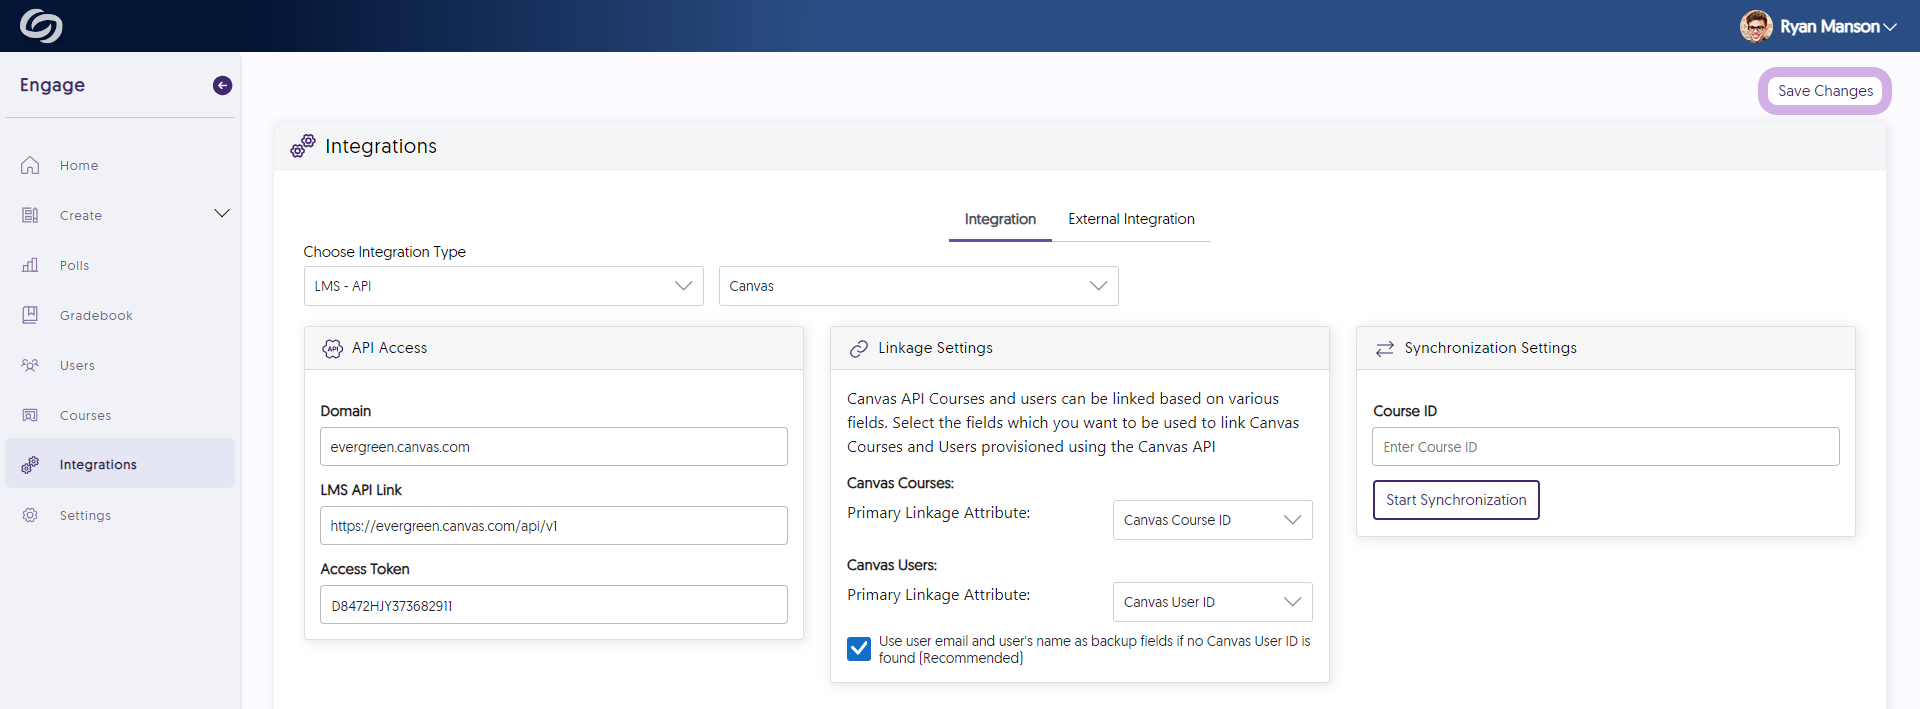 The Engage Integration page for Canvas. The Save button is highlighted.